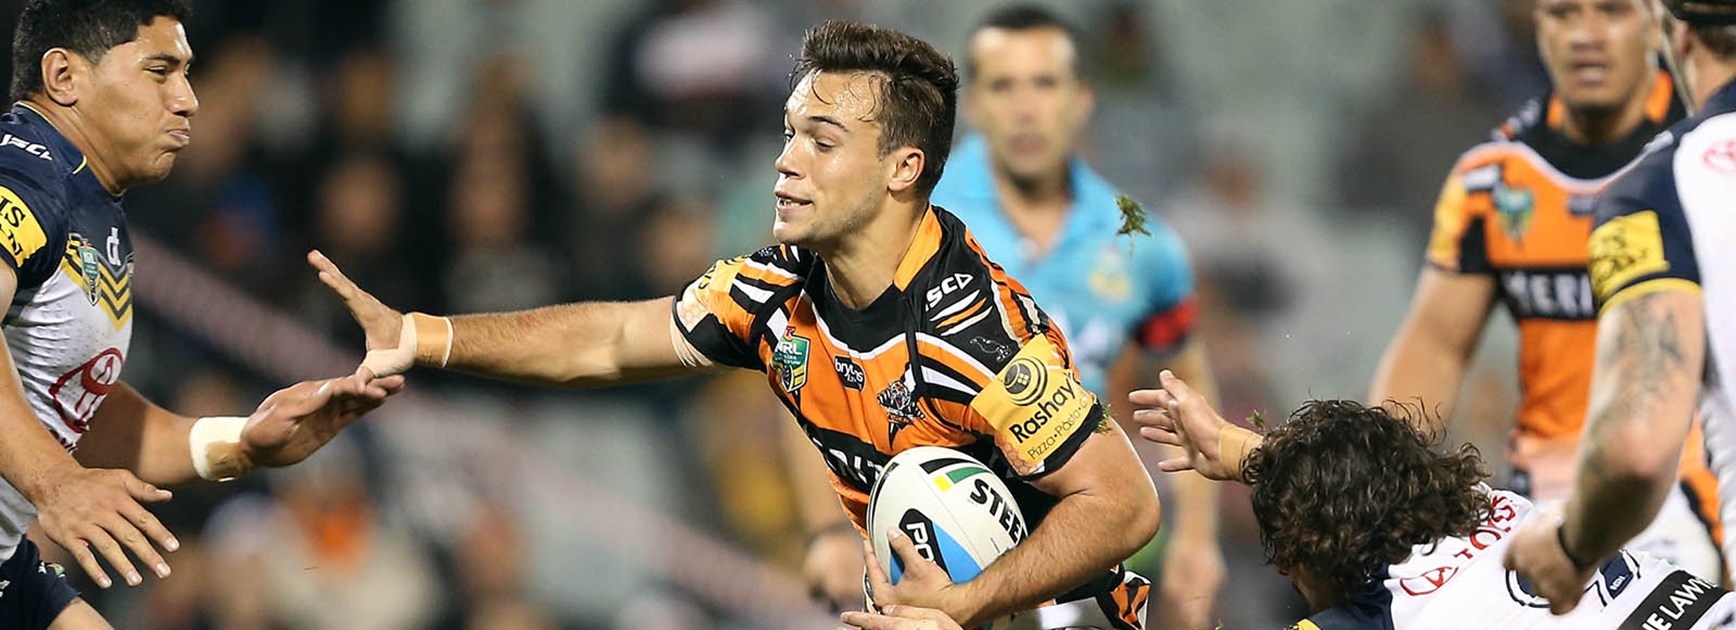 Luke Brooks makes a run against the Cowboys in Round 11.